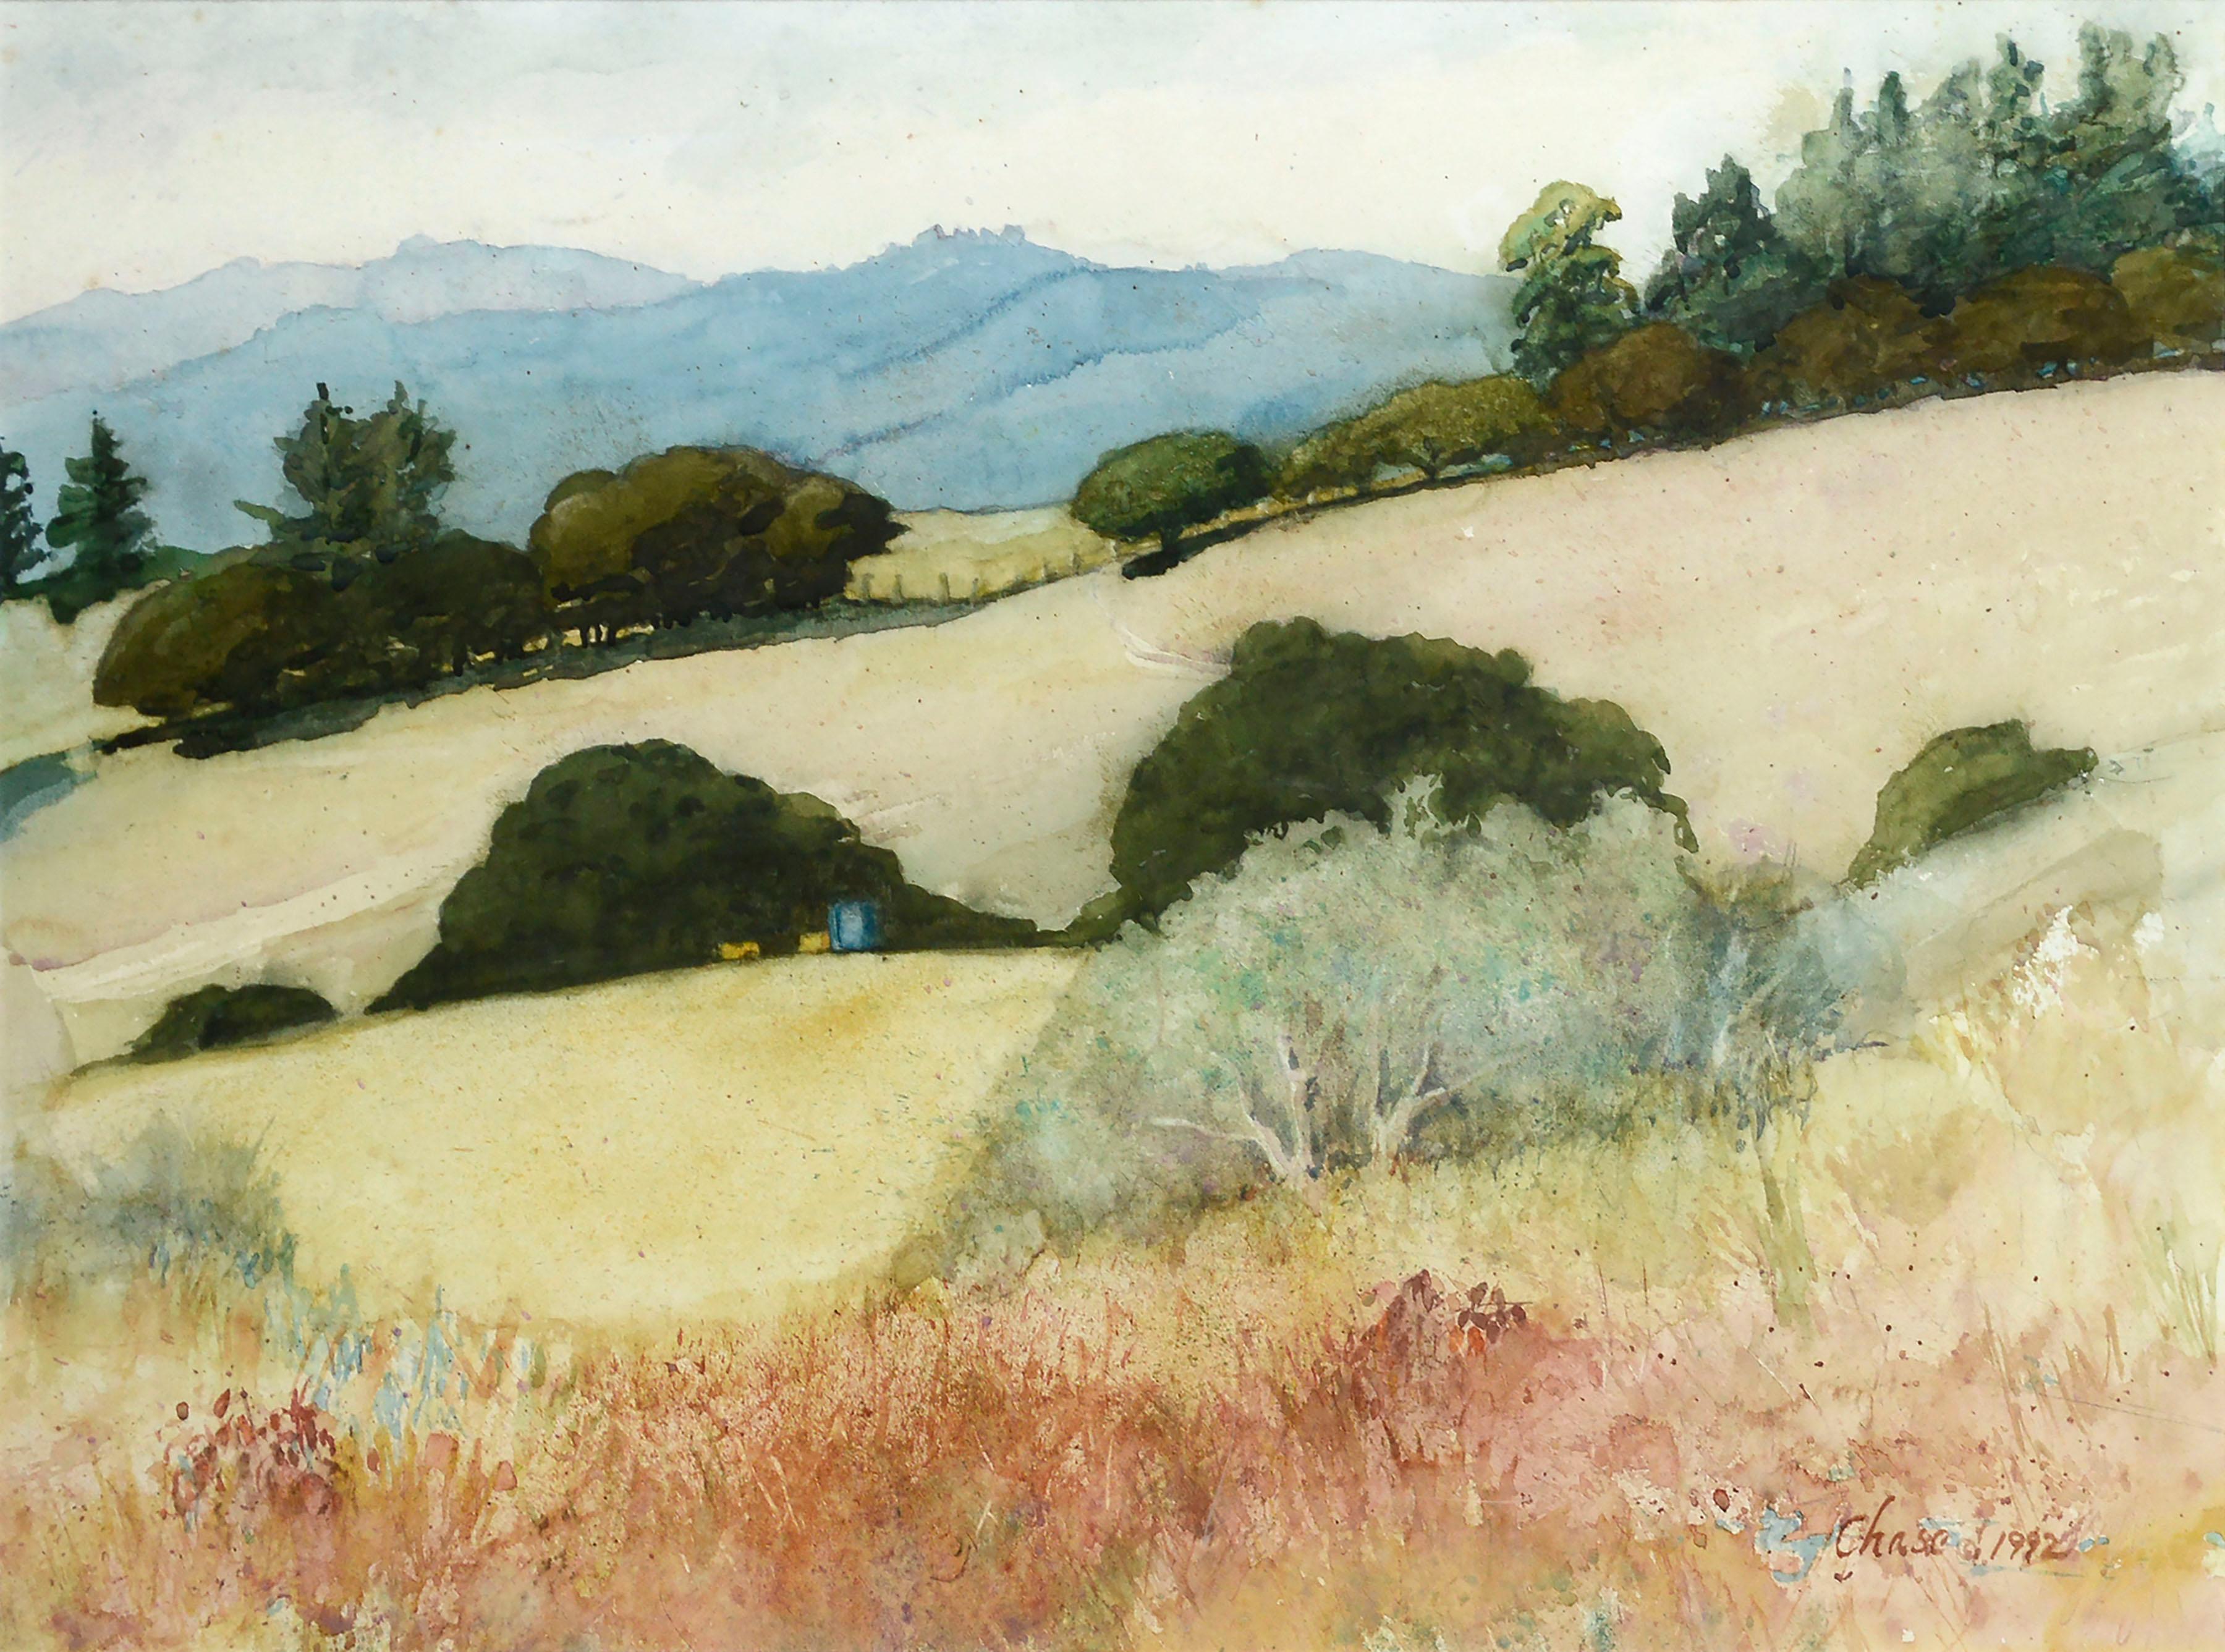 Spring in the Meadow, Large-Scale Santa Cruz Rolling Hills Watercolor Landscape  - Art by Chase B. Sullivan